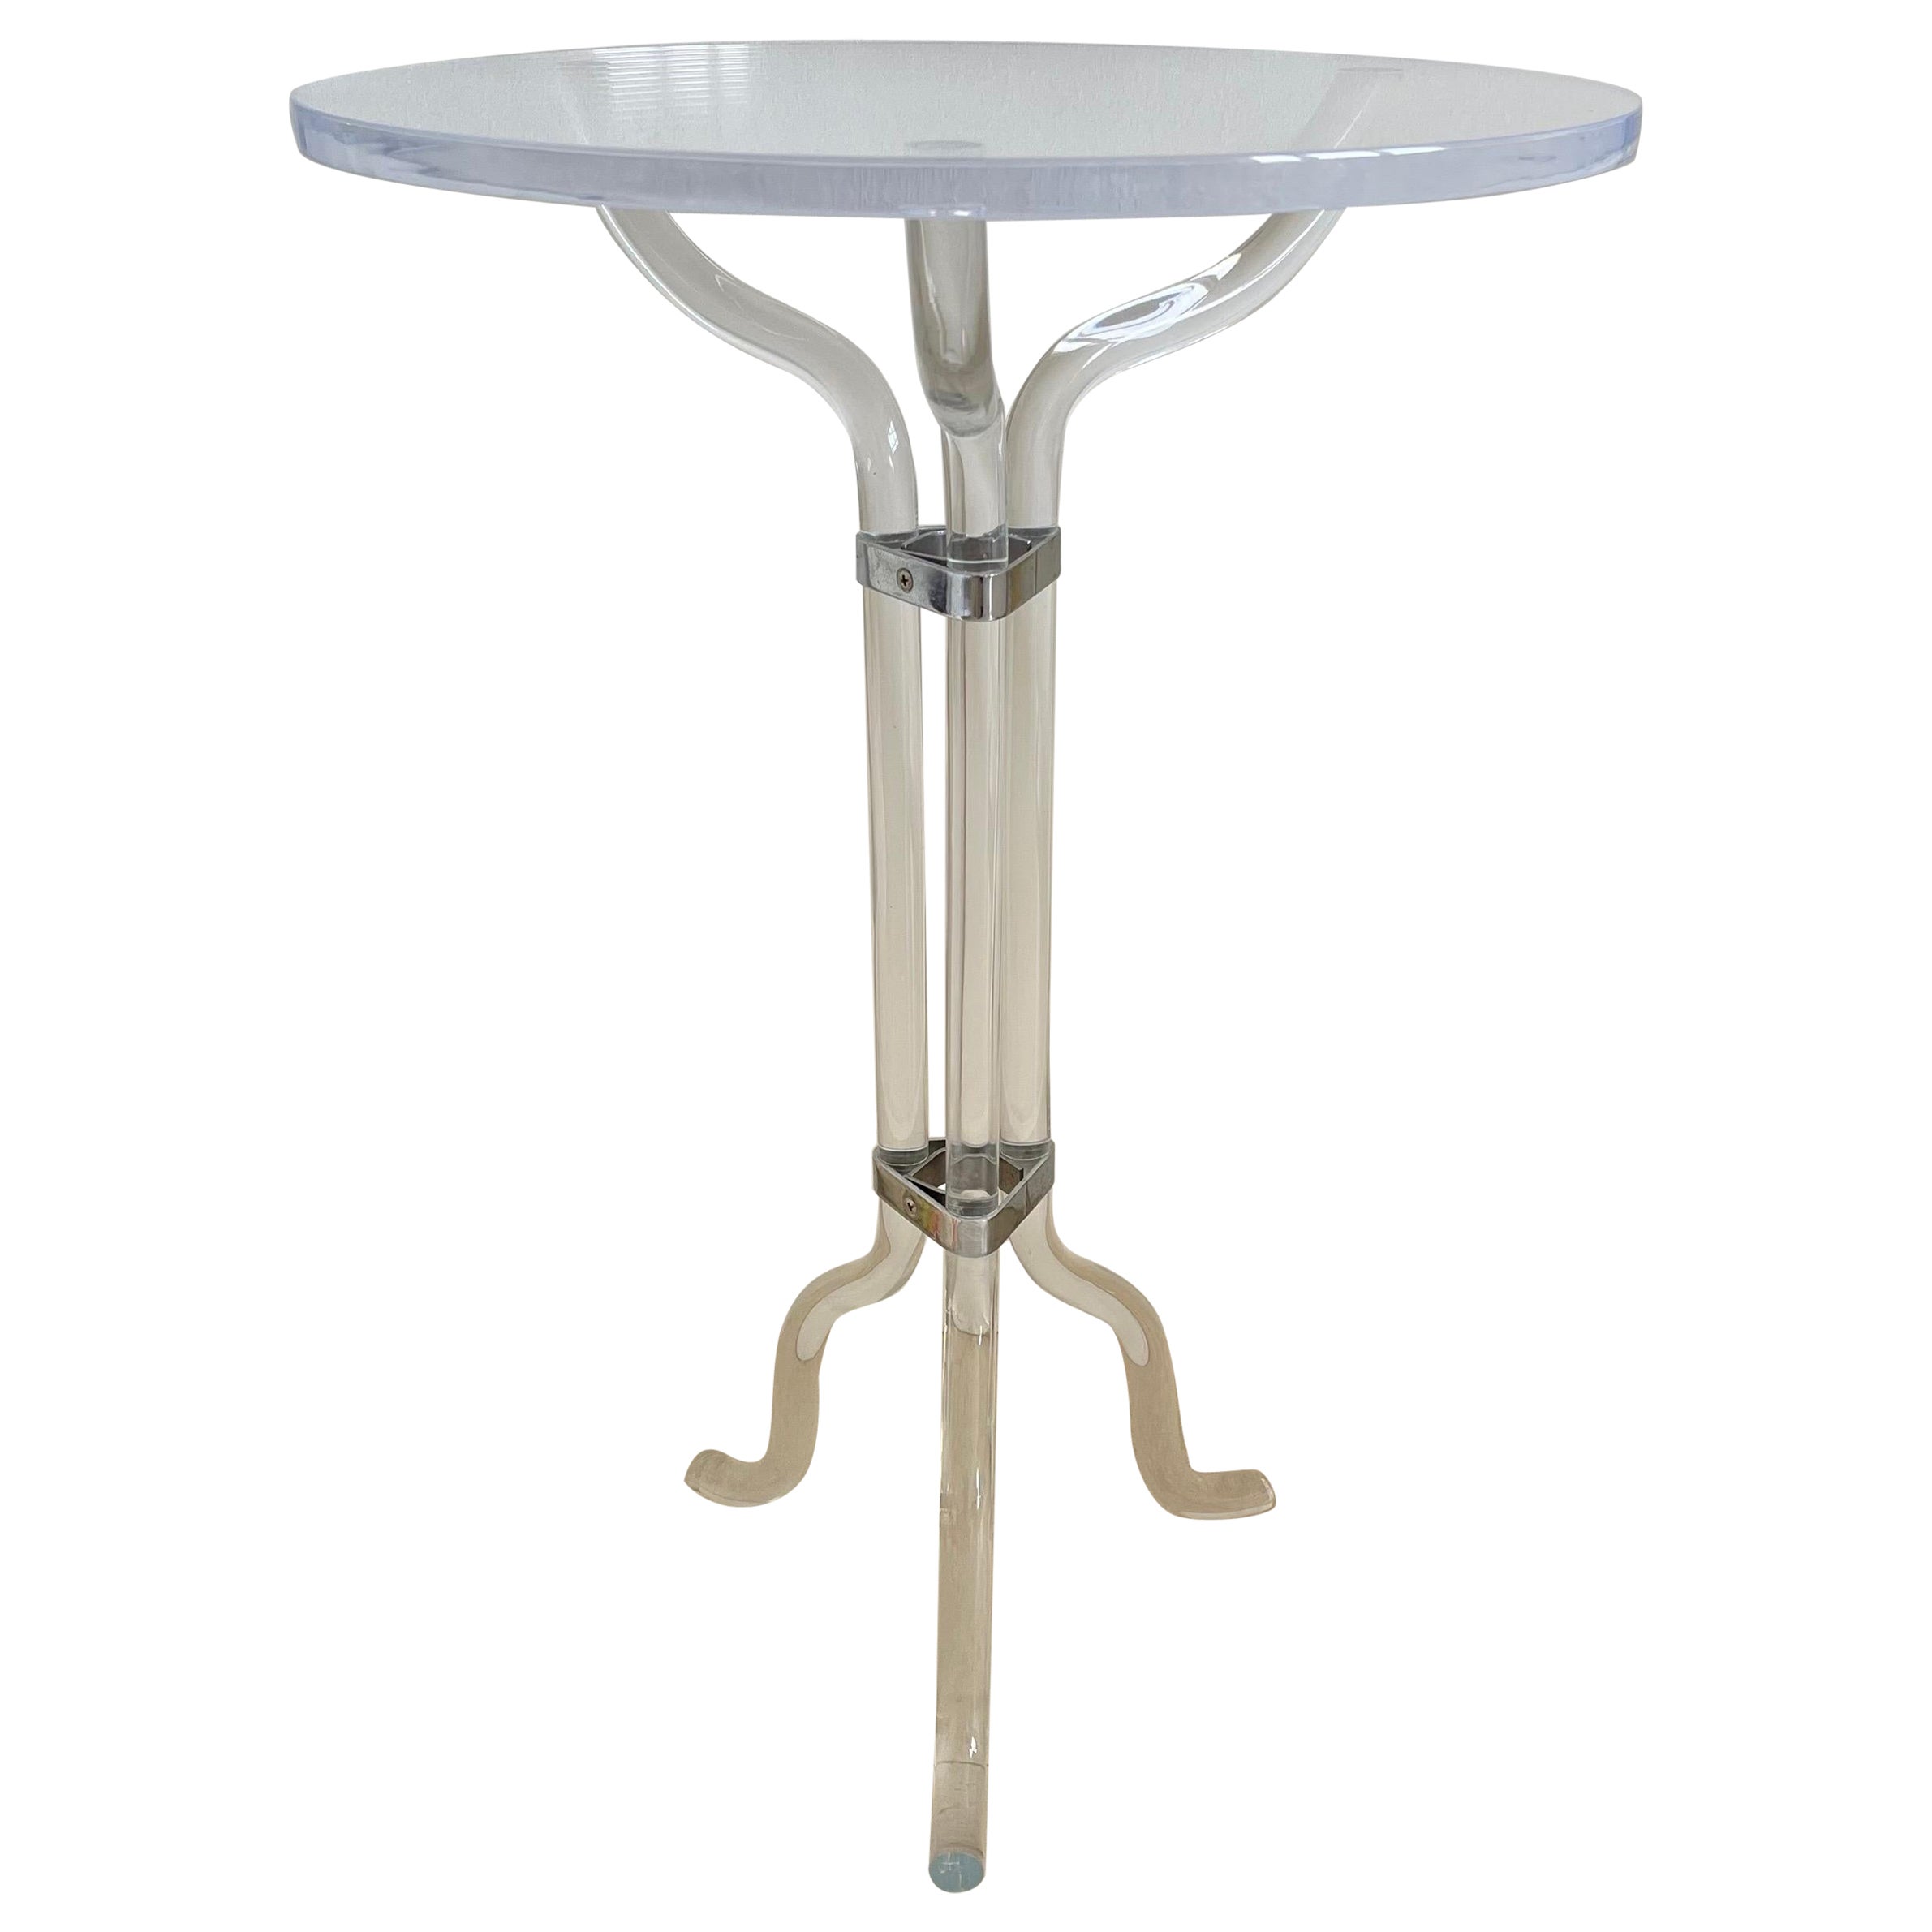 Dorothy Thorpe Attributed Lucite and Chrome Side or End Table, USA, Circa 1940s